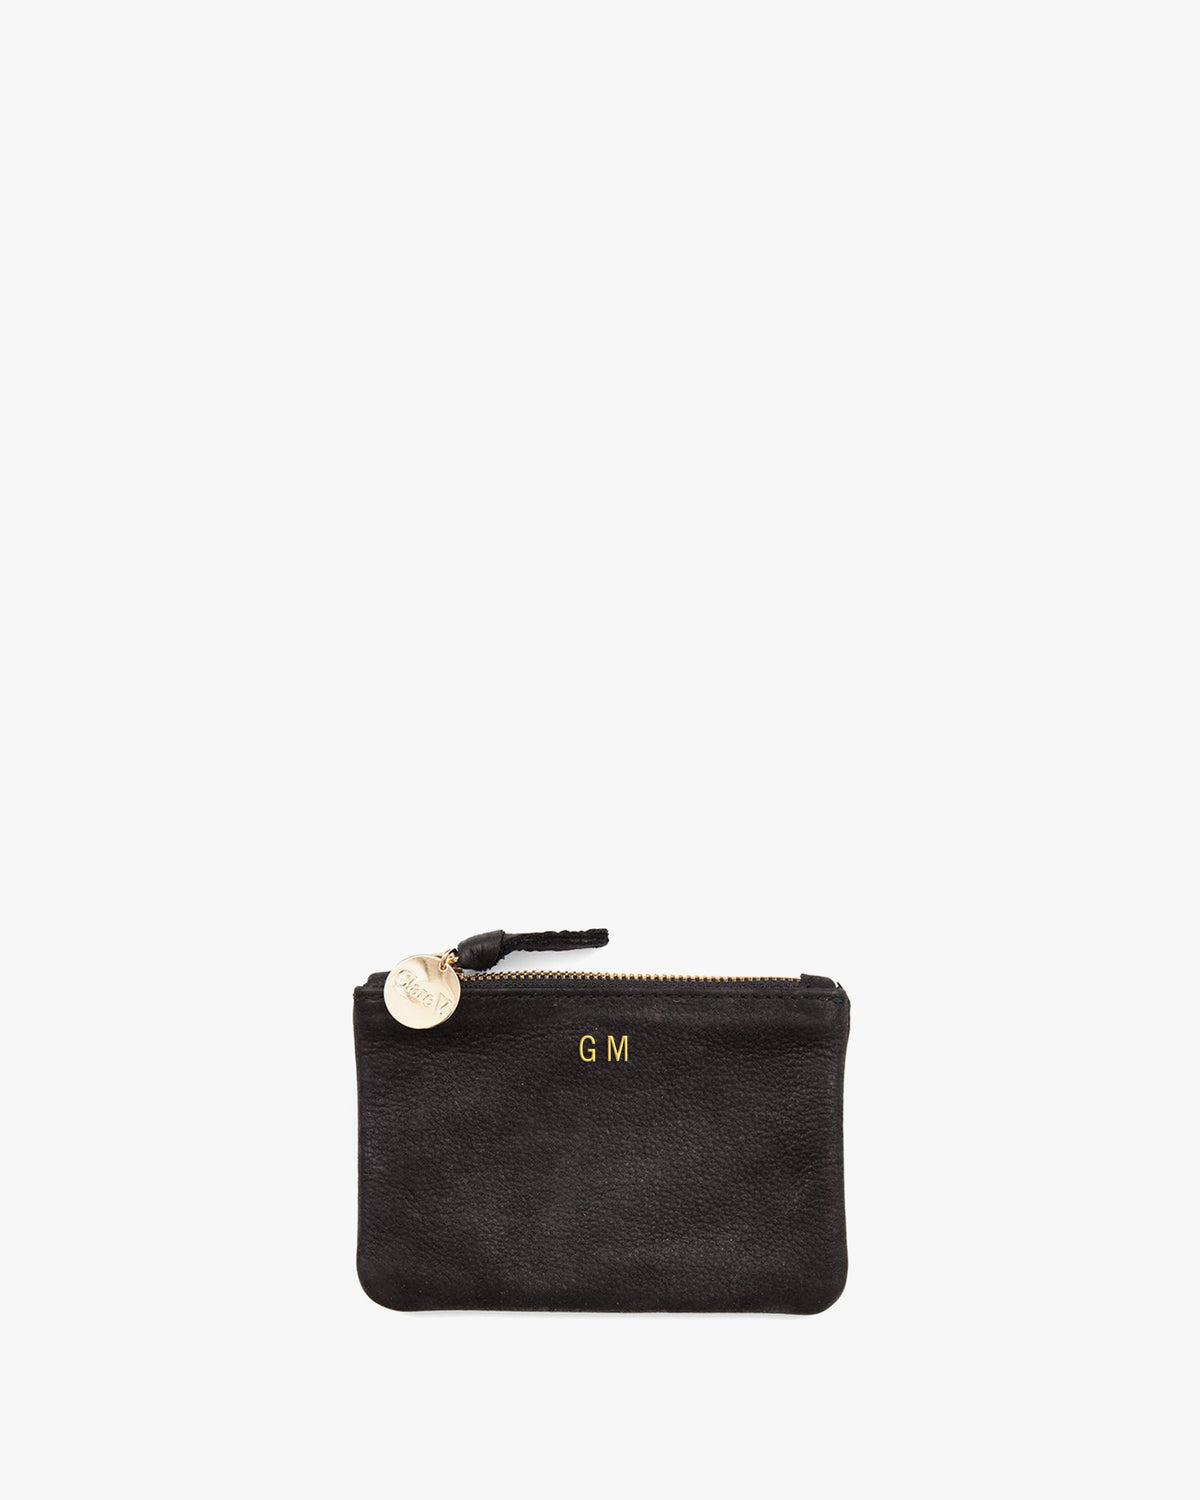 Black Nubuck Coin Clutch with Petit  Gold Foil Monogram In The Top Center